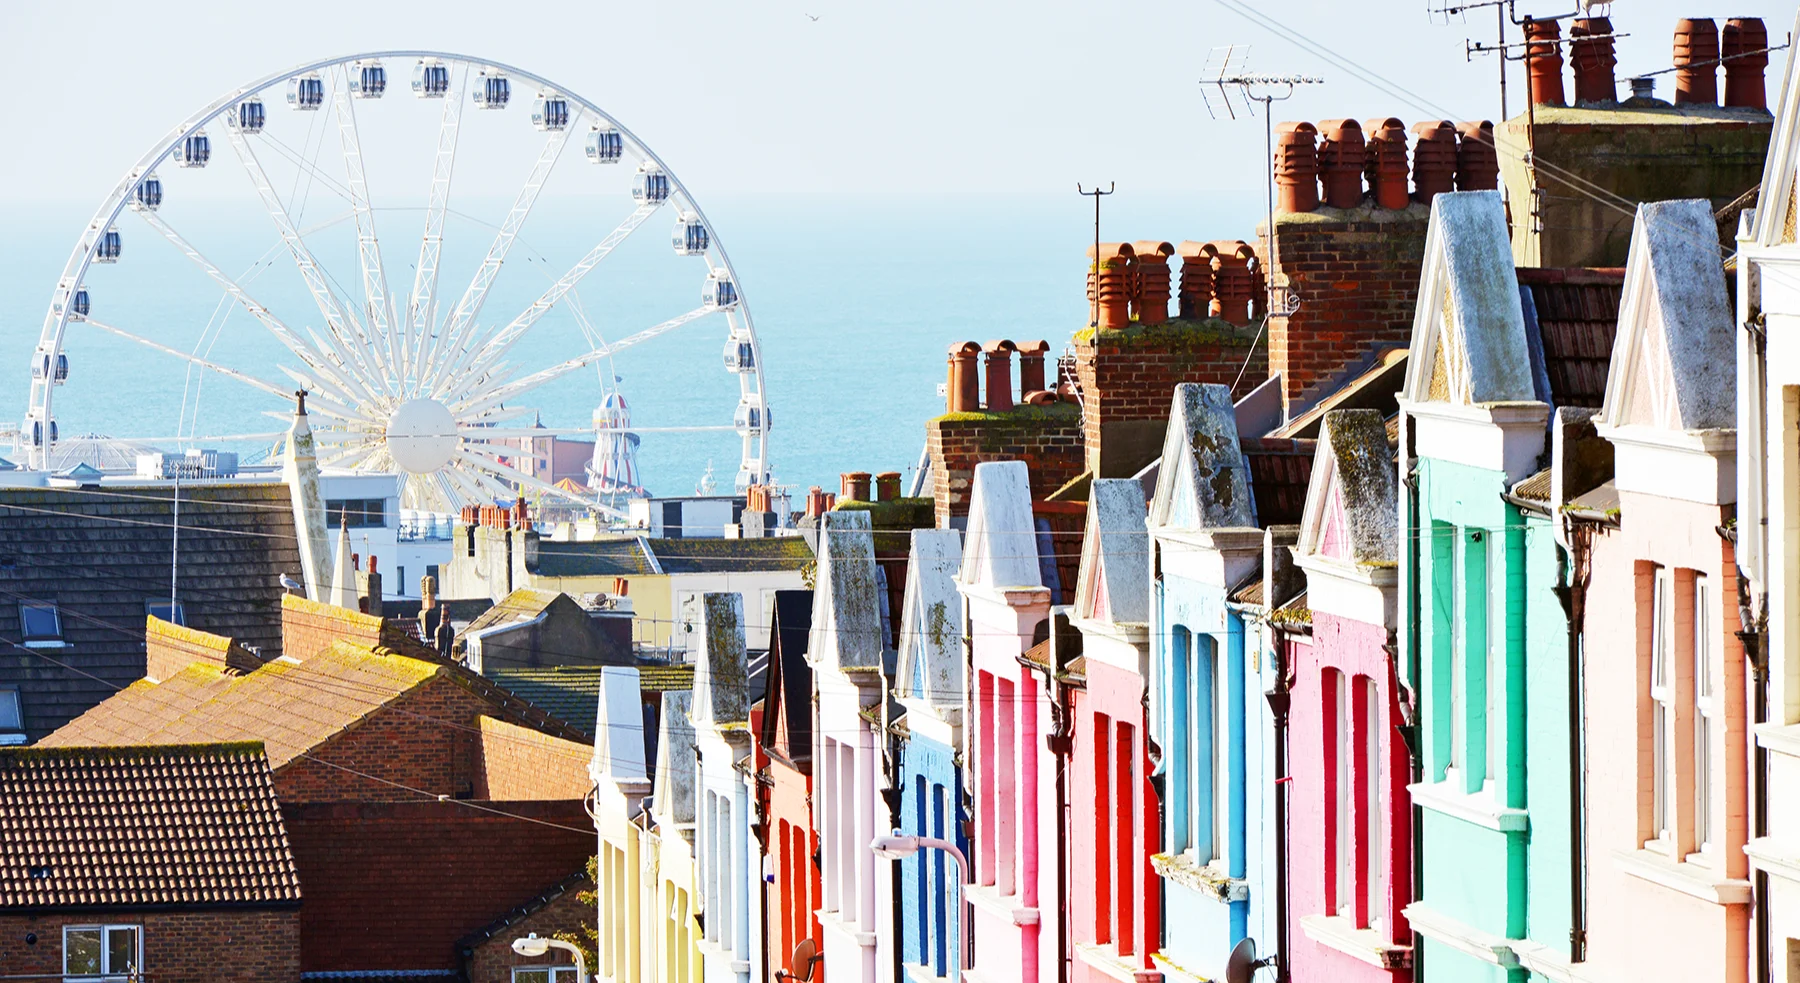 A row of brightly painted terraced houses with a view of the sea and a ferris wheel in the background.